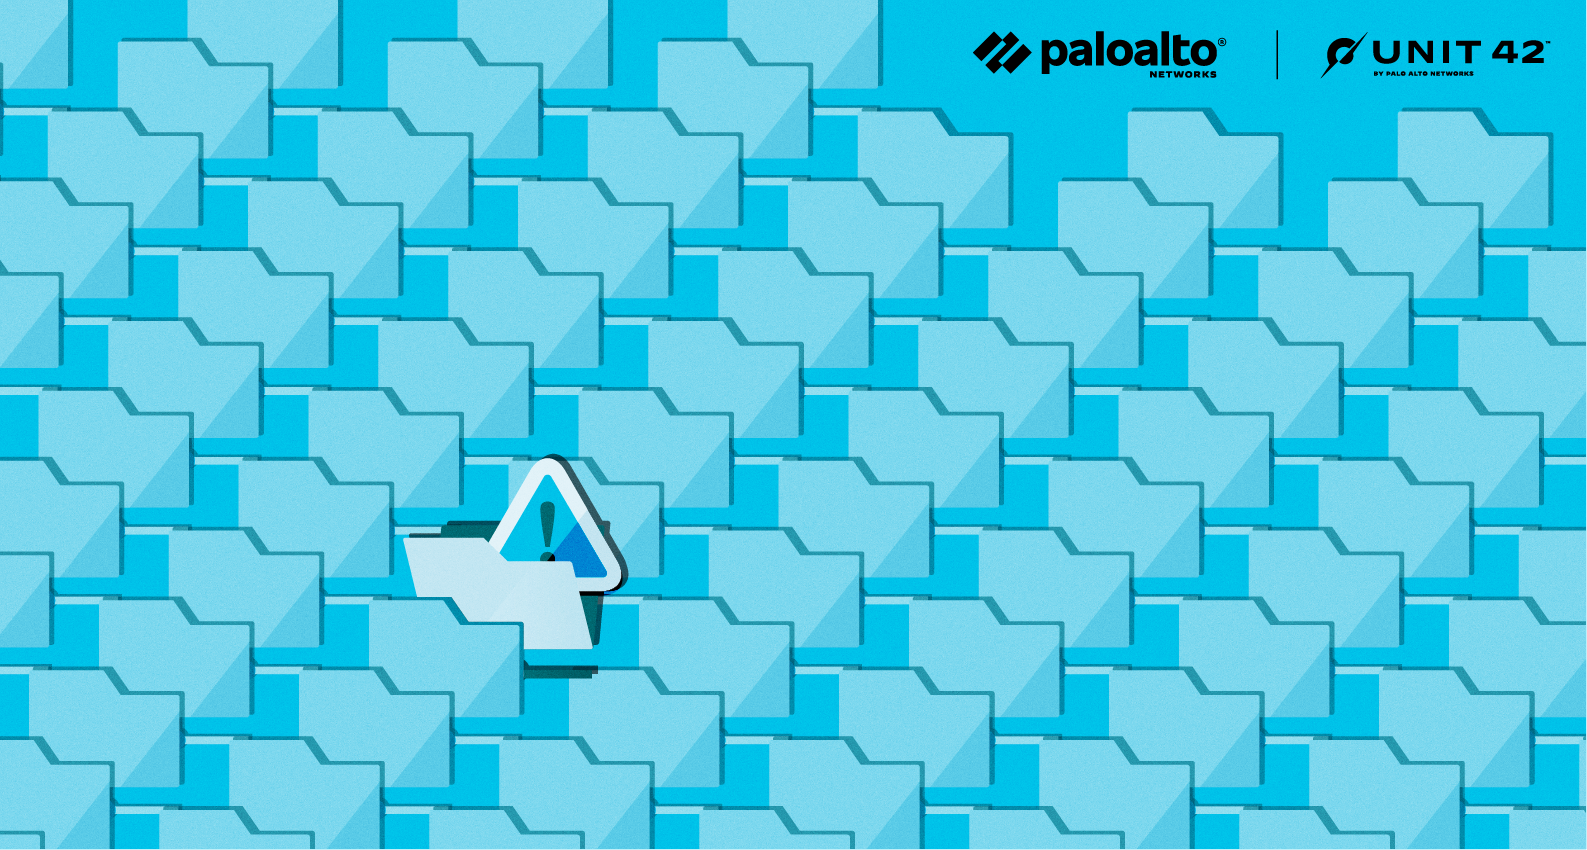 DNS security and issues such as domain shadowing are represented by the caution sign within a folder structure. Image includes Palo Alto Networks and Unit 42 logos.